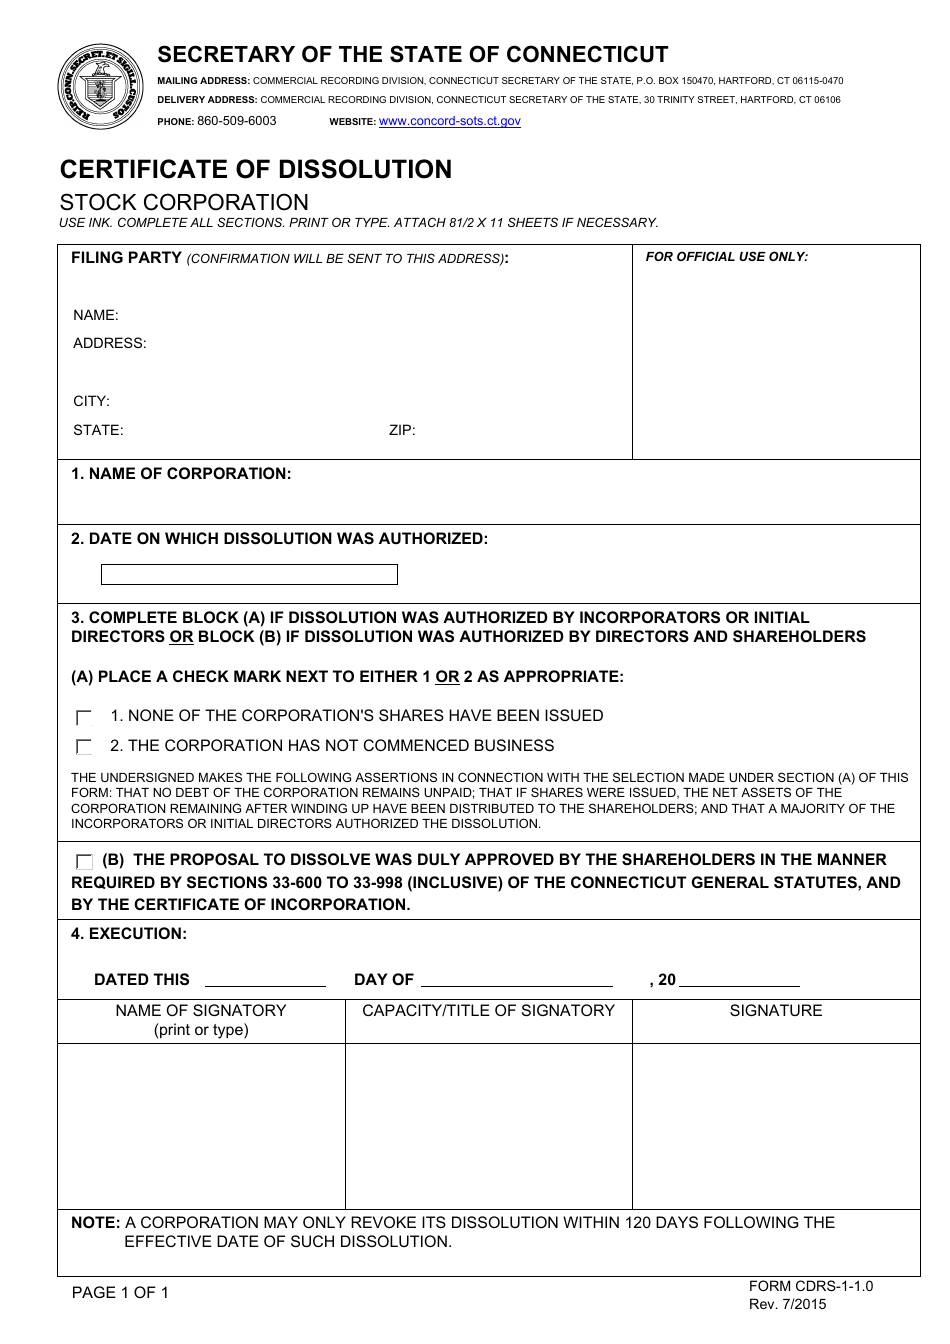 Form CDRS-1-1.0 Certificate of Dissolution - Stock Corporation - Connecticut, Page 1